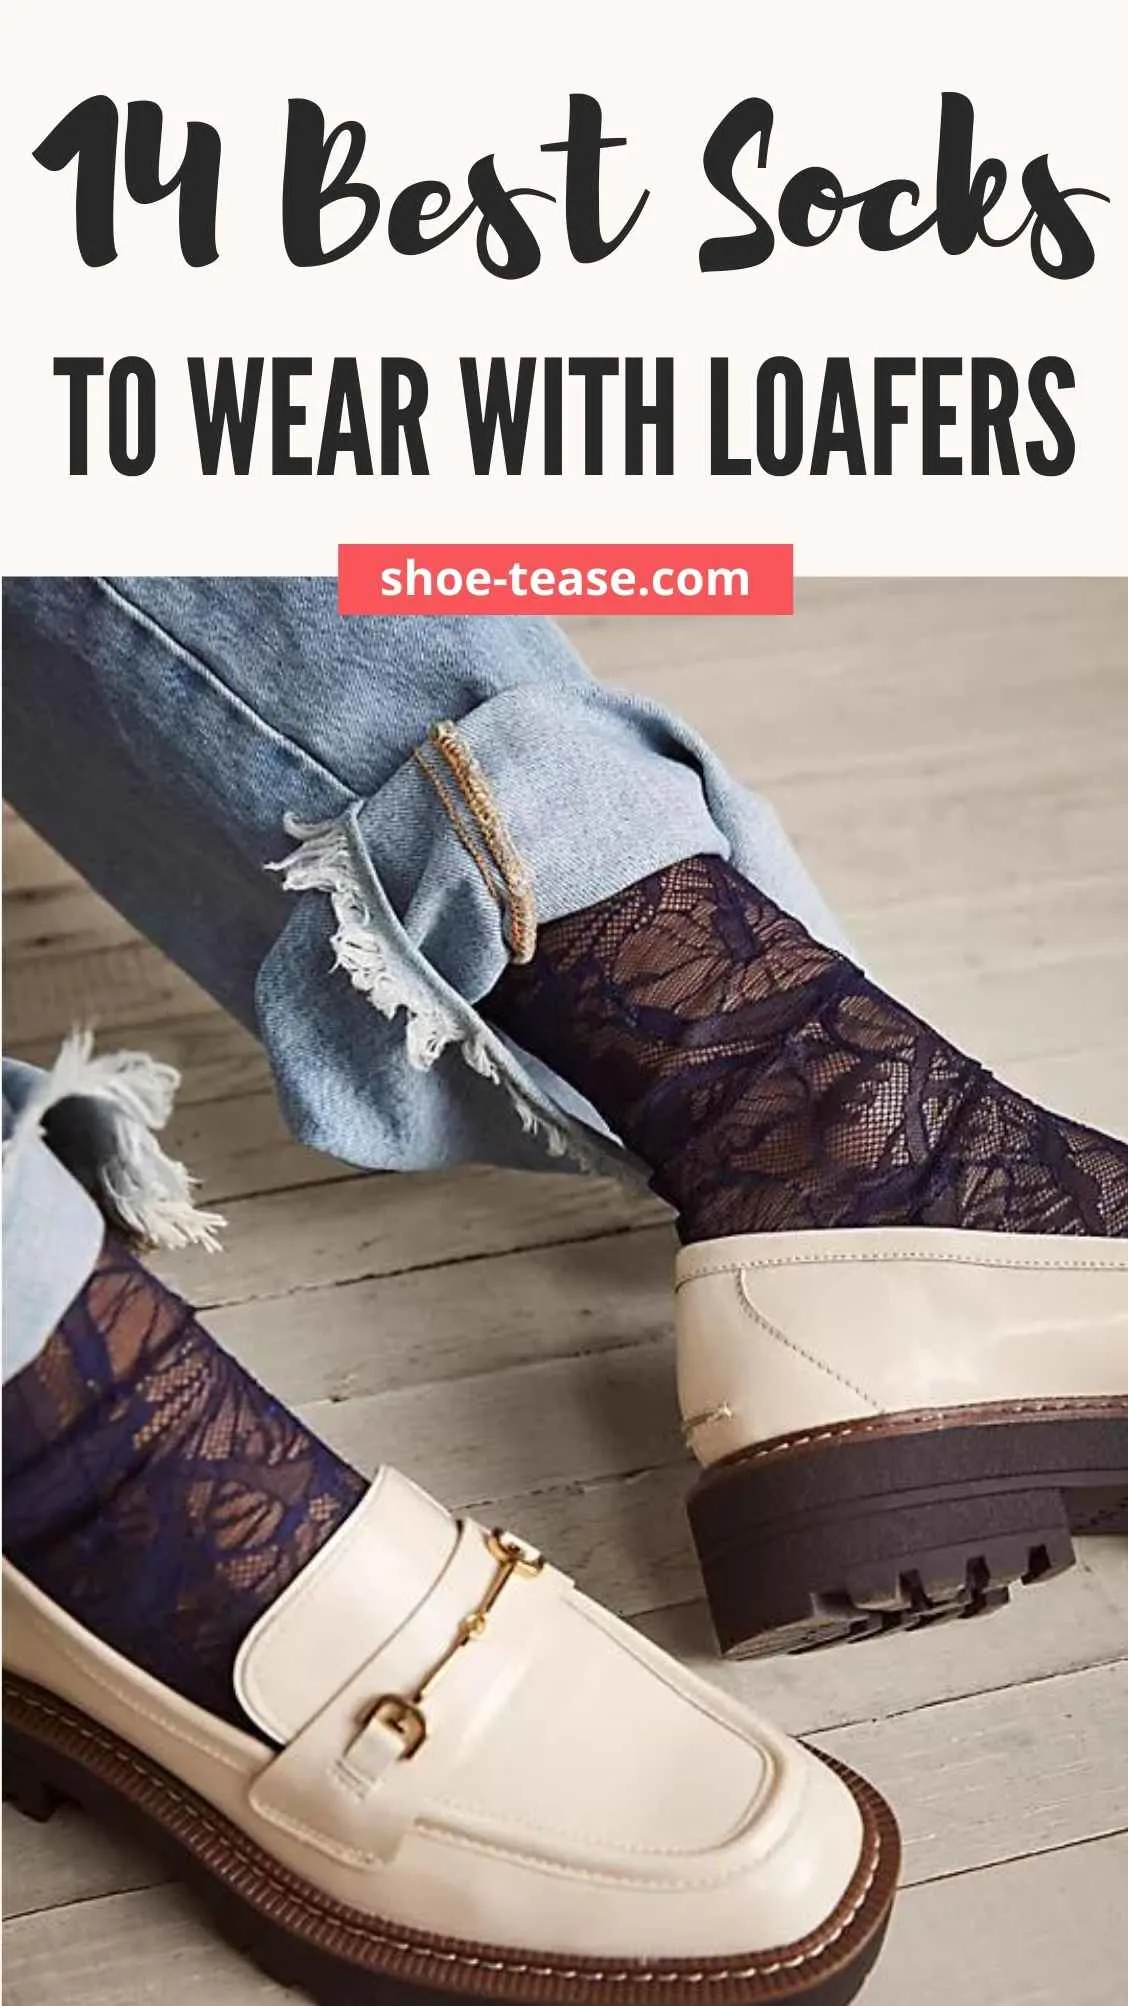 Text reading 14 best socks to wear with loafers under close up of woman's feet wearing dark lace socks with off white loafers and rolled up blue jeans.